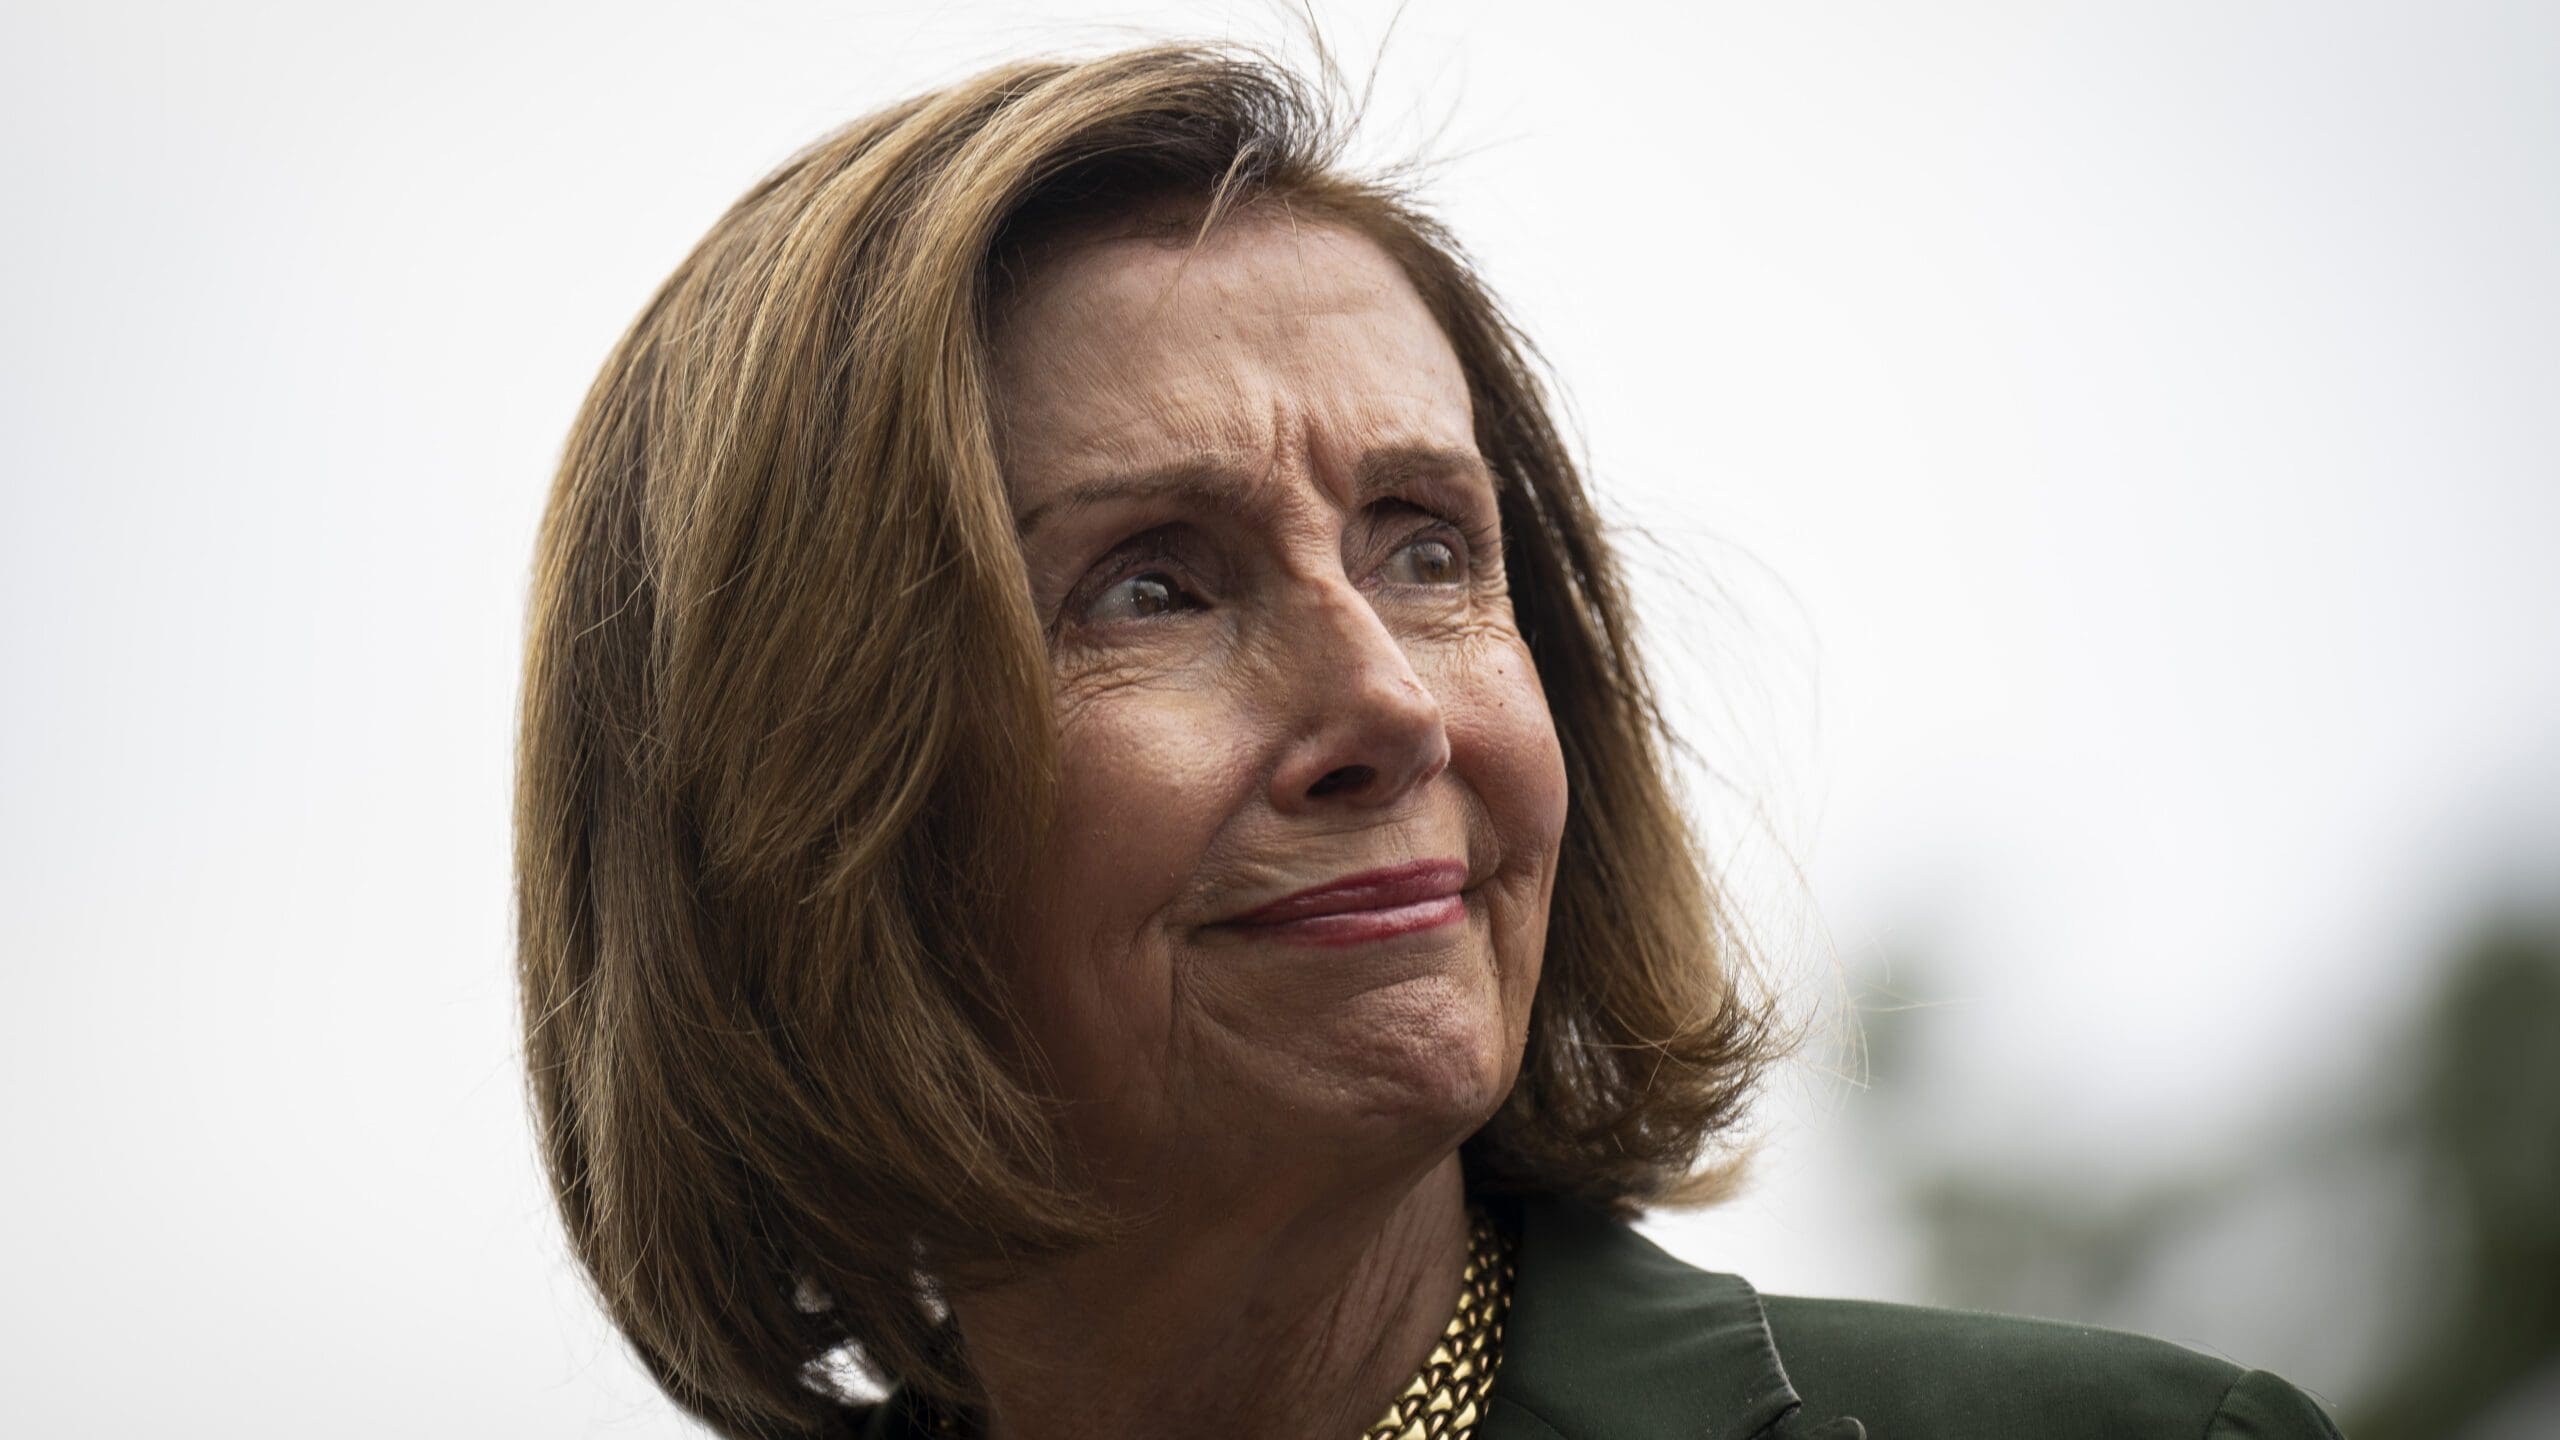 pelosi-slammed-for-remarks-about-immigrants-needing-to-‘pick’-‘crops’